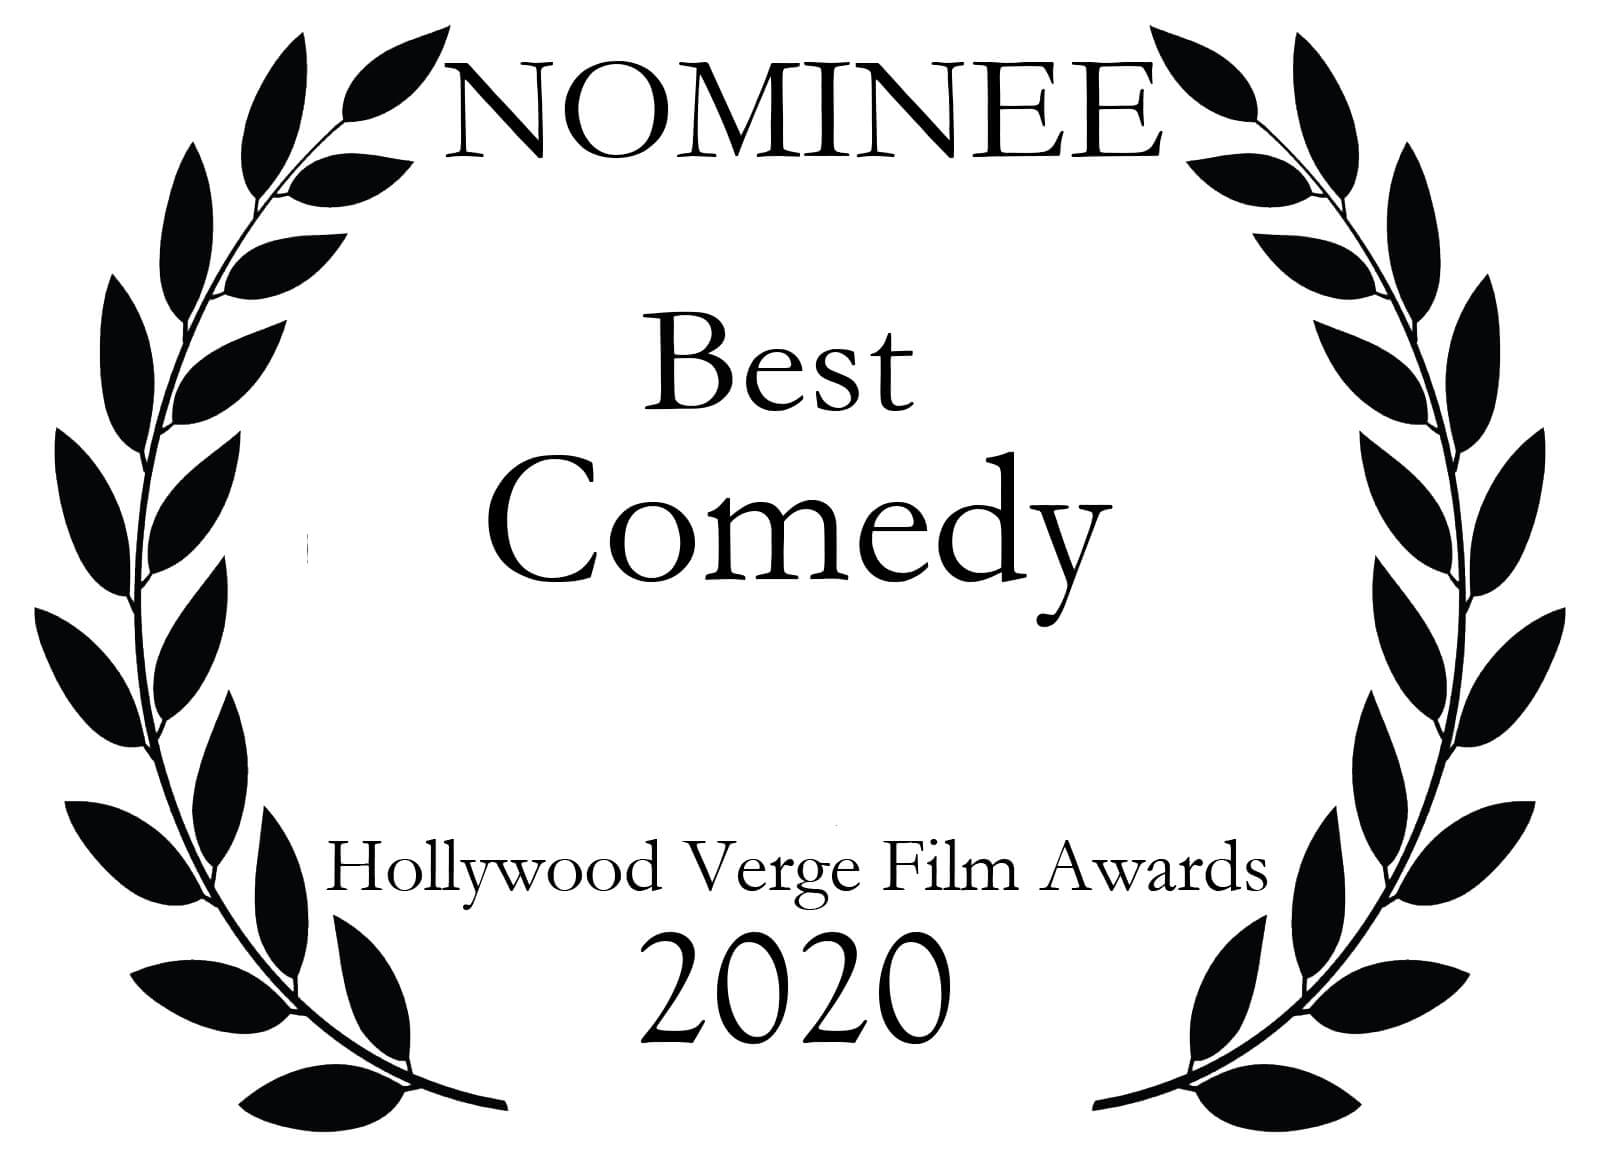 Nominee - Best Comedy - Hollywood Verge Film Awards 